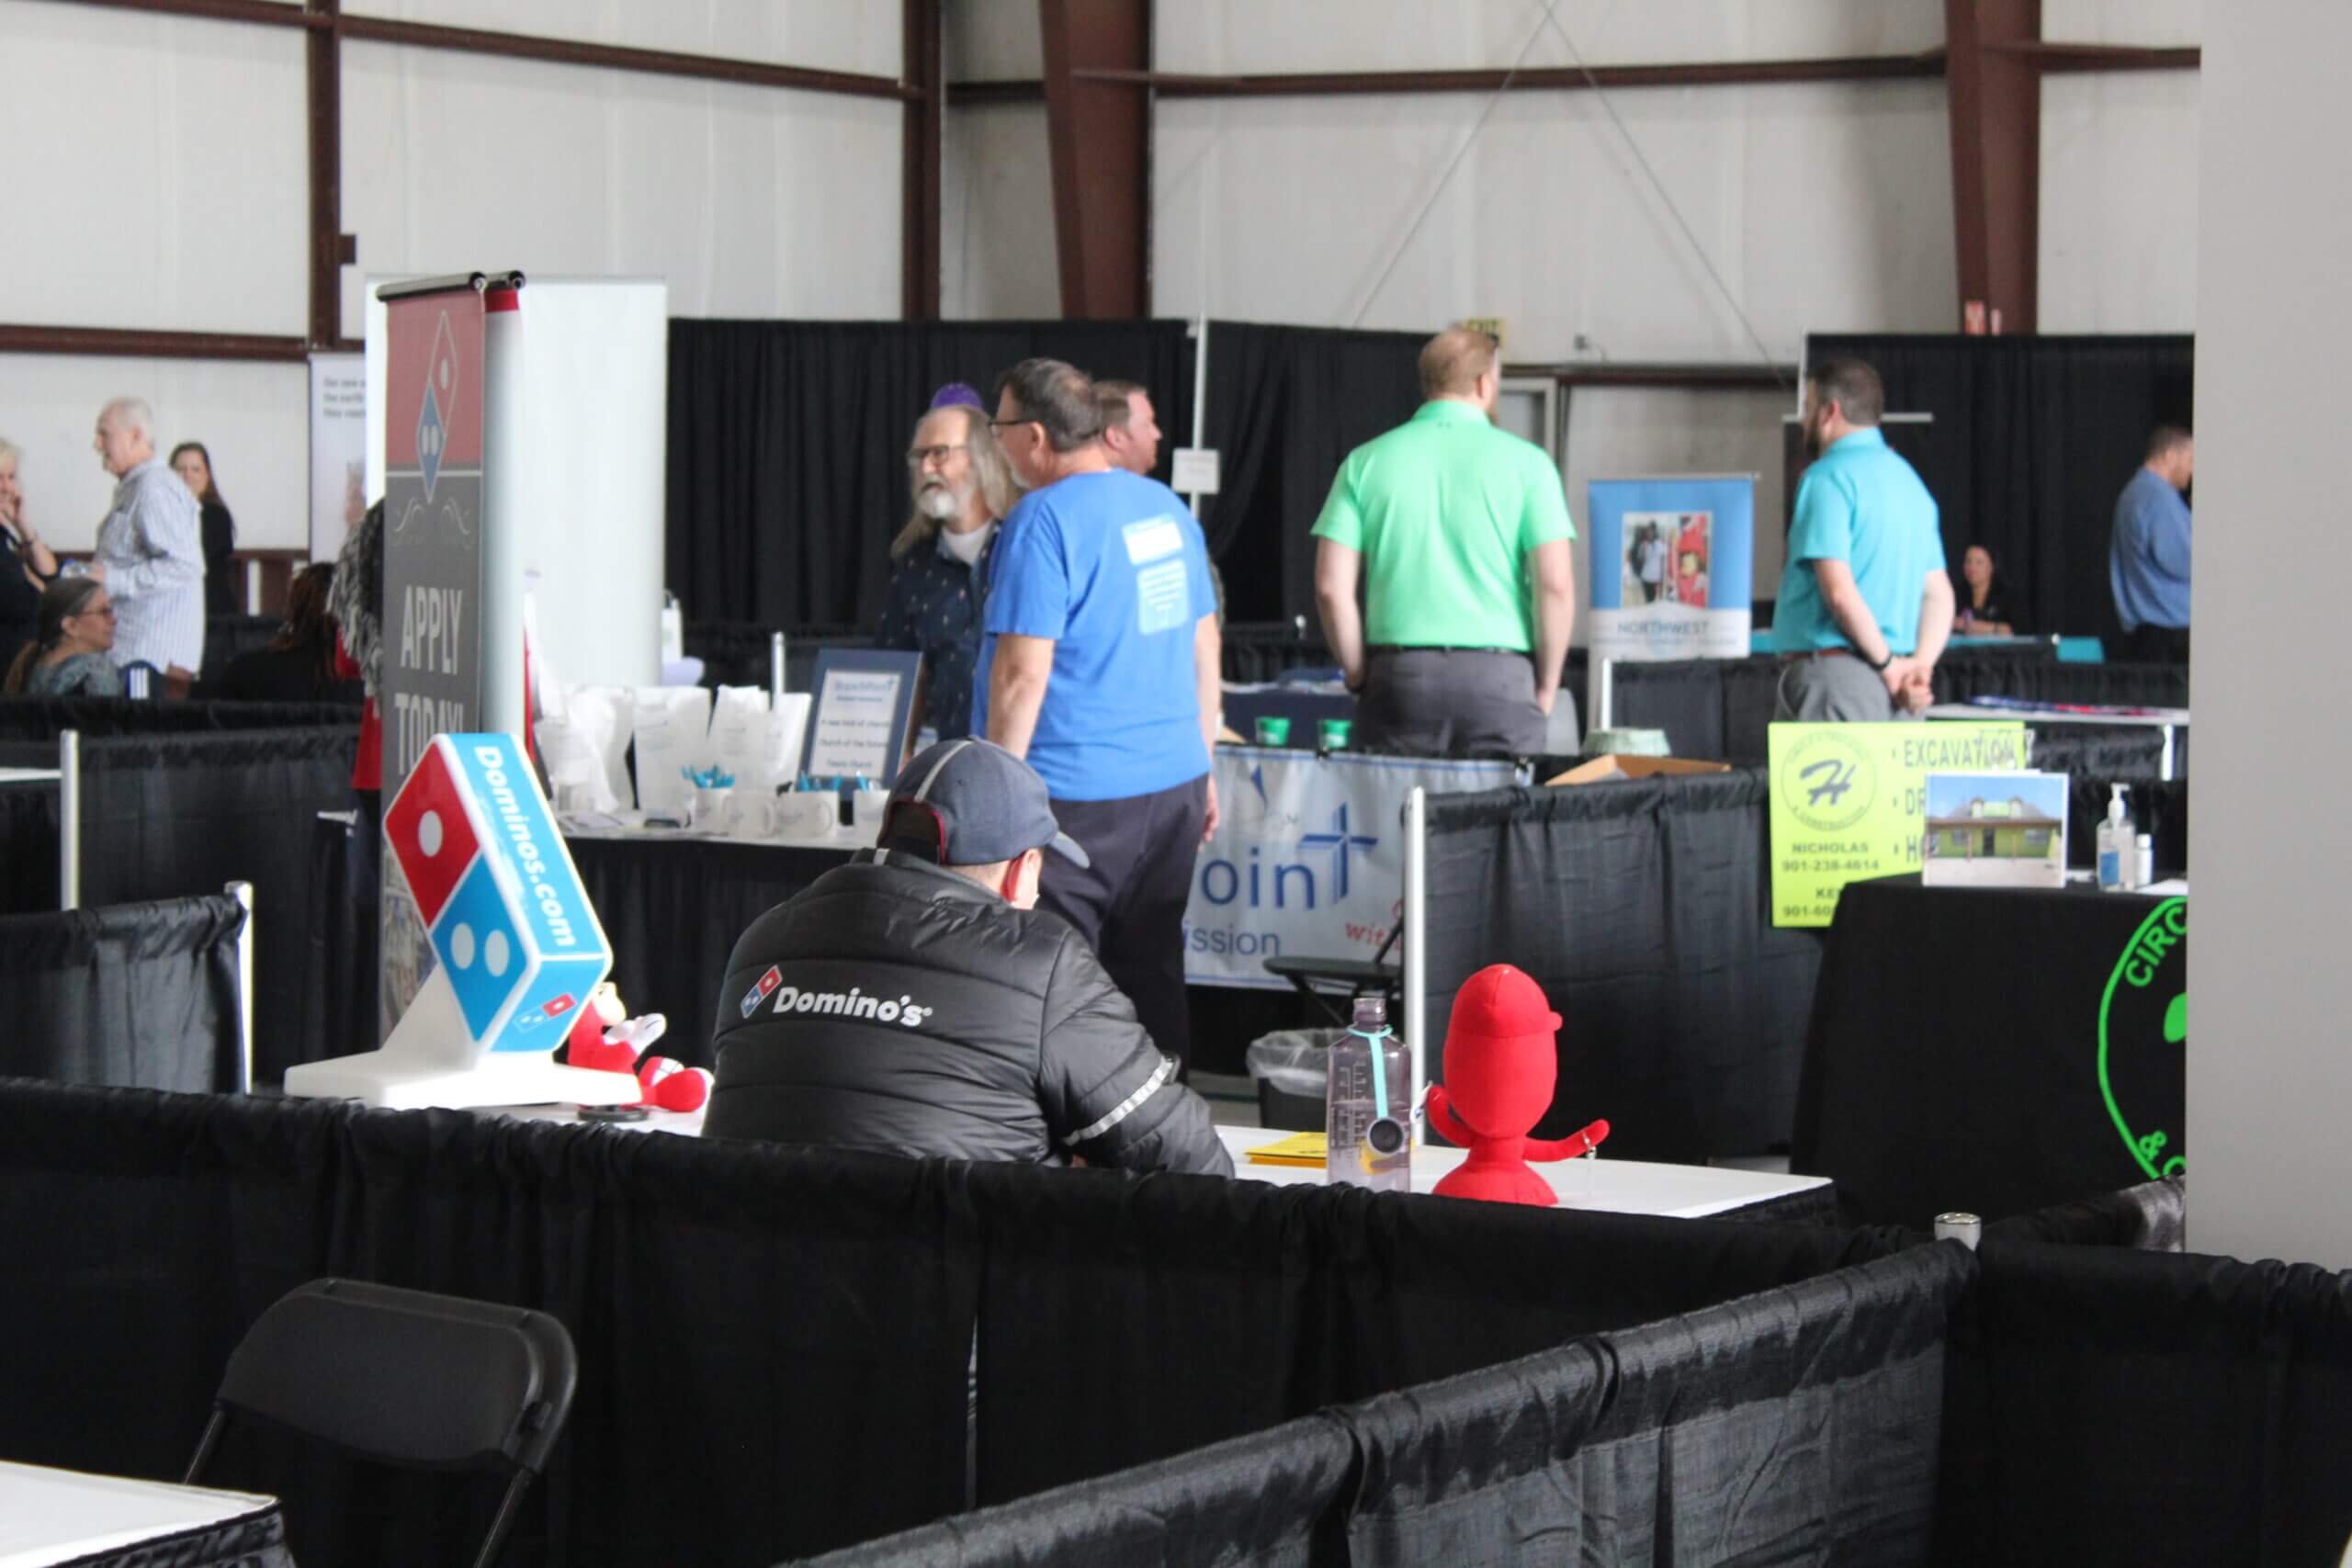 Business Expo held in Olive Branch